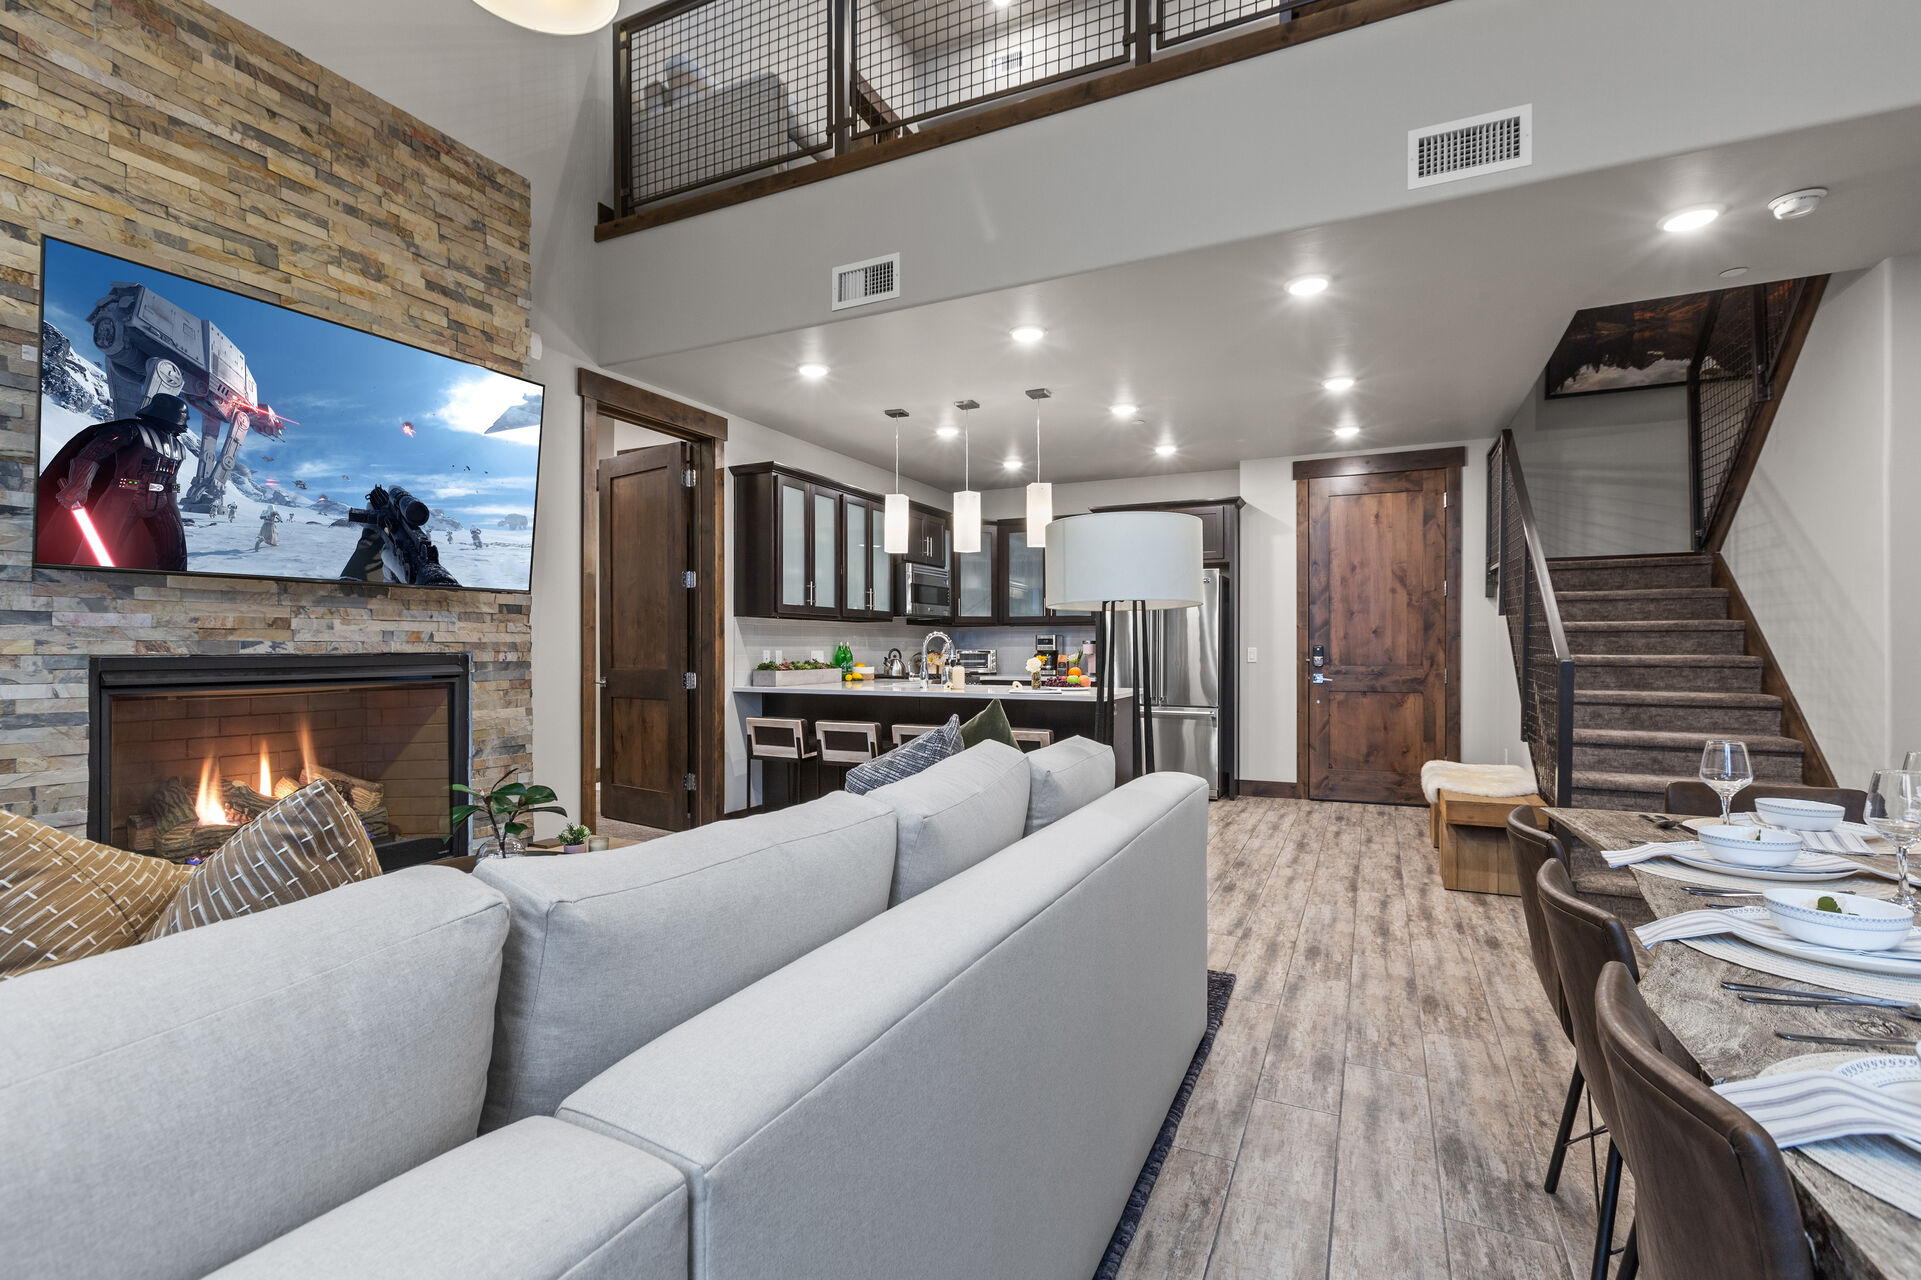 Contemporary furniture including a sectional sofa with sofa sleeper, a Smart TV, and a cozy gas fireplace. Step out onto the adjacent deck and you will also find outdoor furnishings and a BBQ grill.